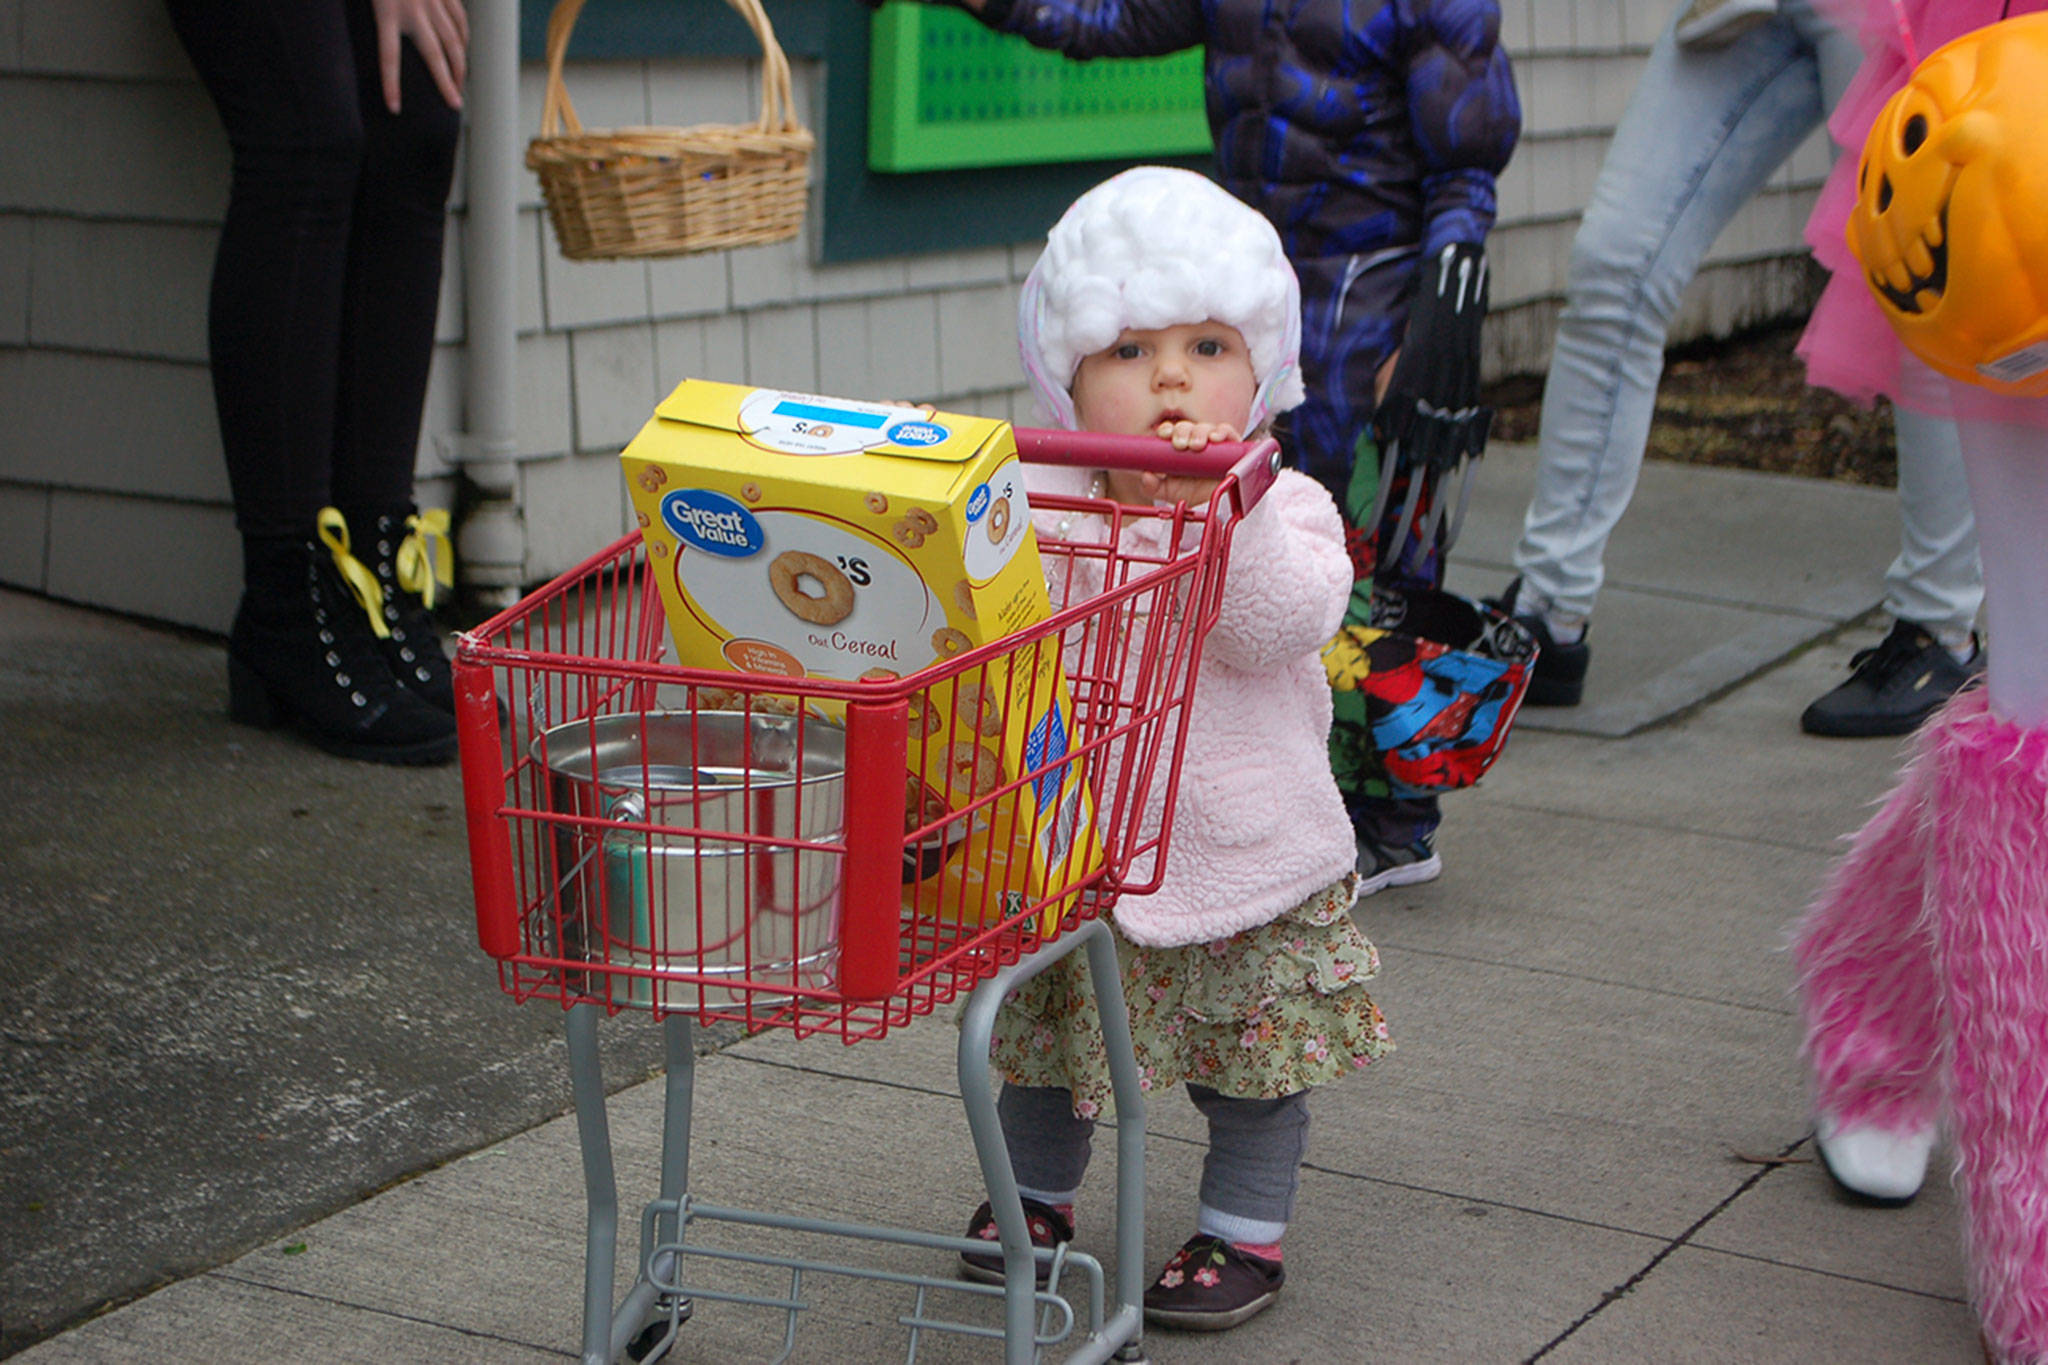 Elizabeth Treece, 14 months, of Sequim, dresses as a “shopping granny” as she pushes a tiny grocery cart with a bowl for candy while she trick-or-treats in downtown Sequim on Oct. 31. Sequim Gazette photo by Erin Hawkins